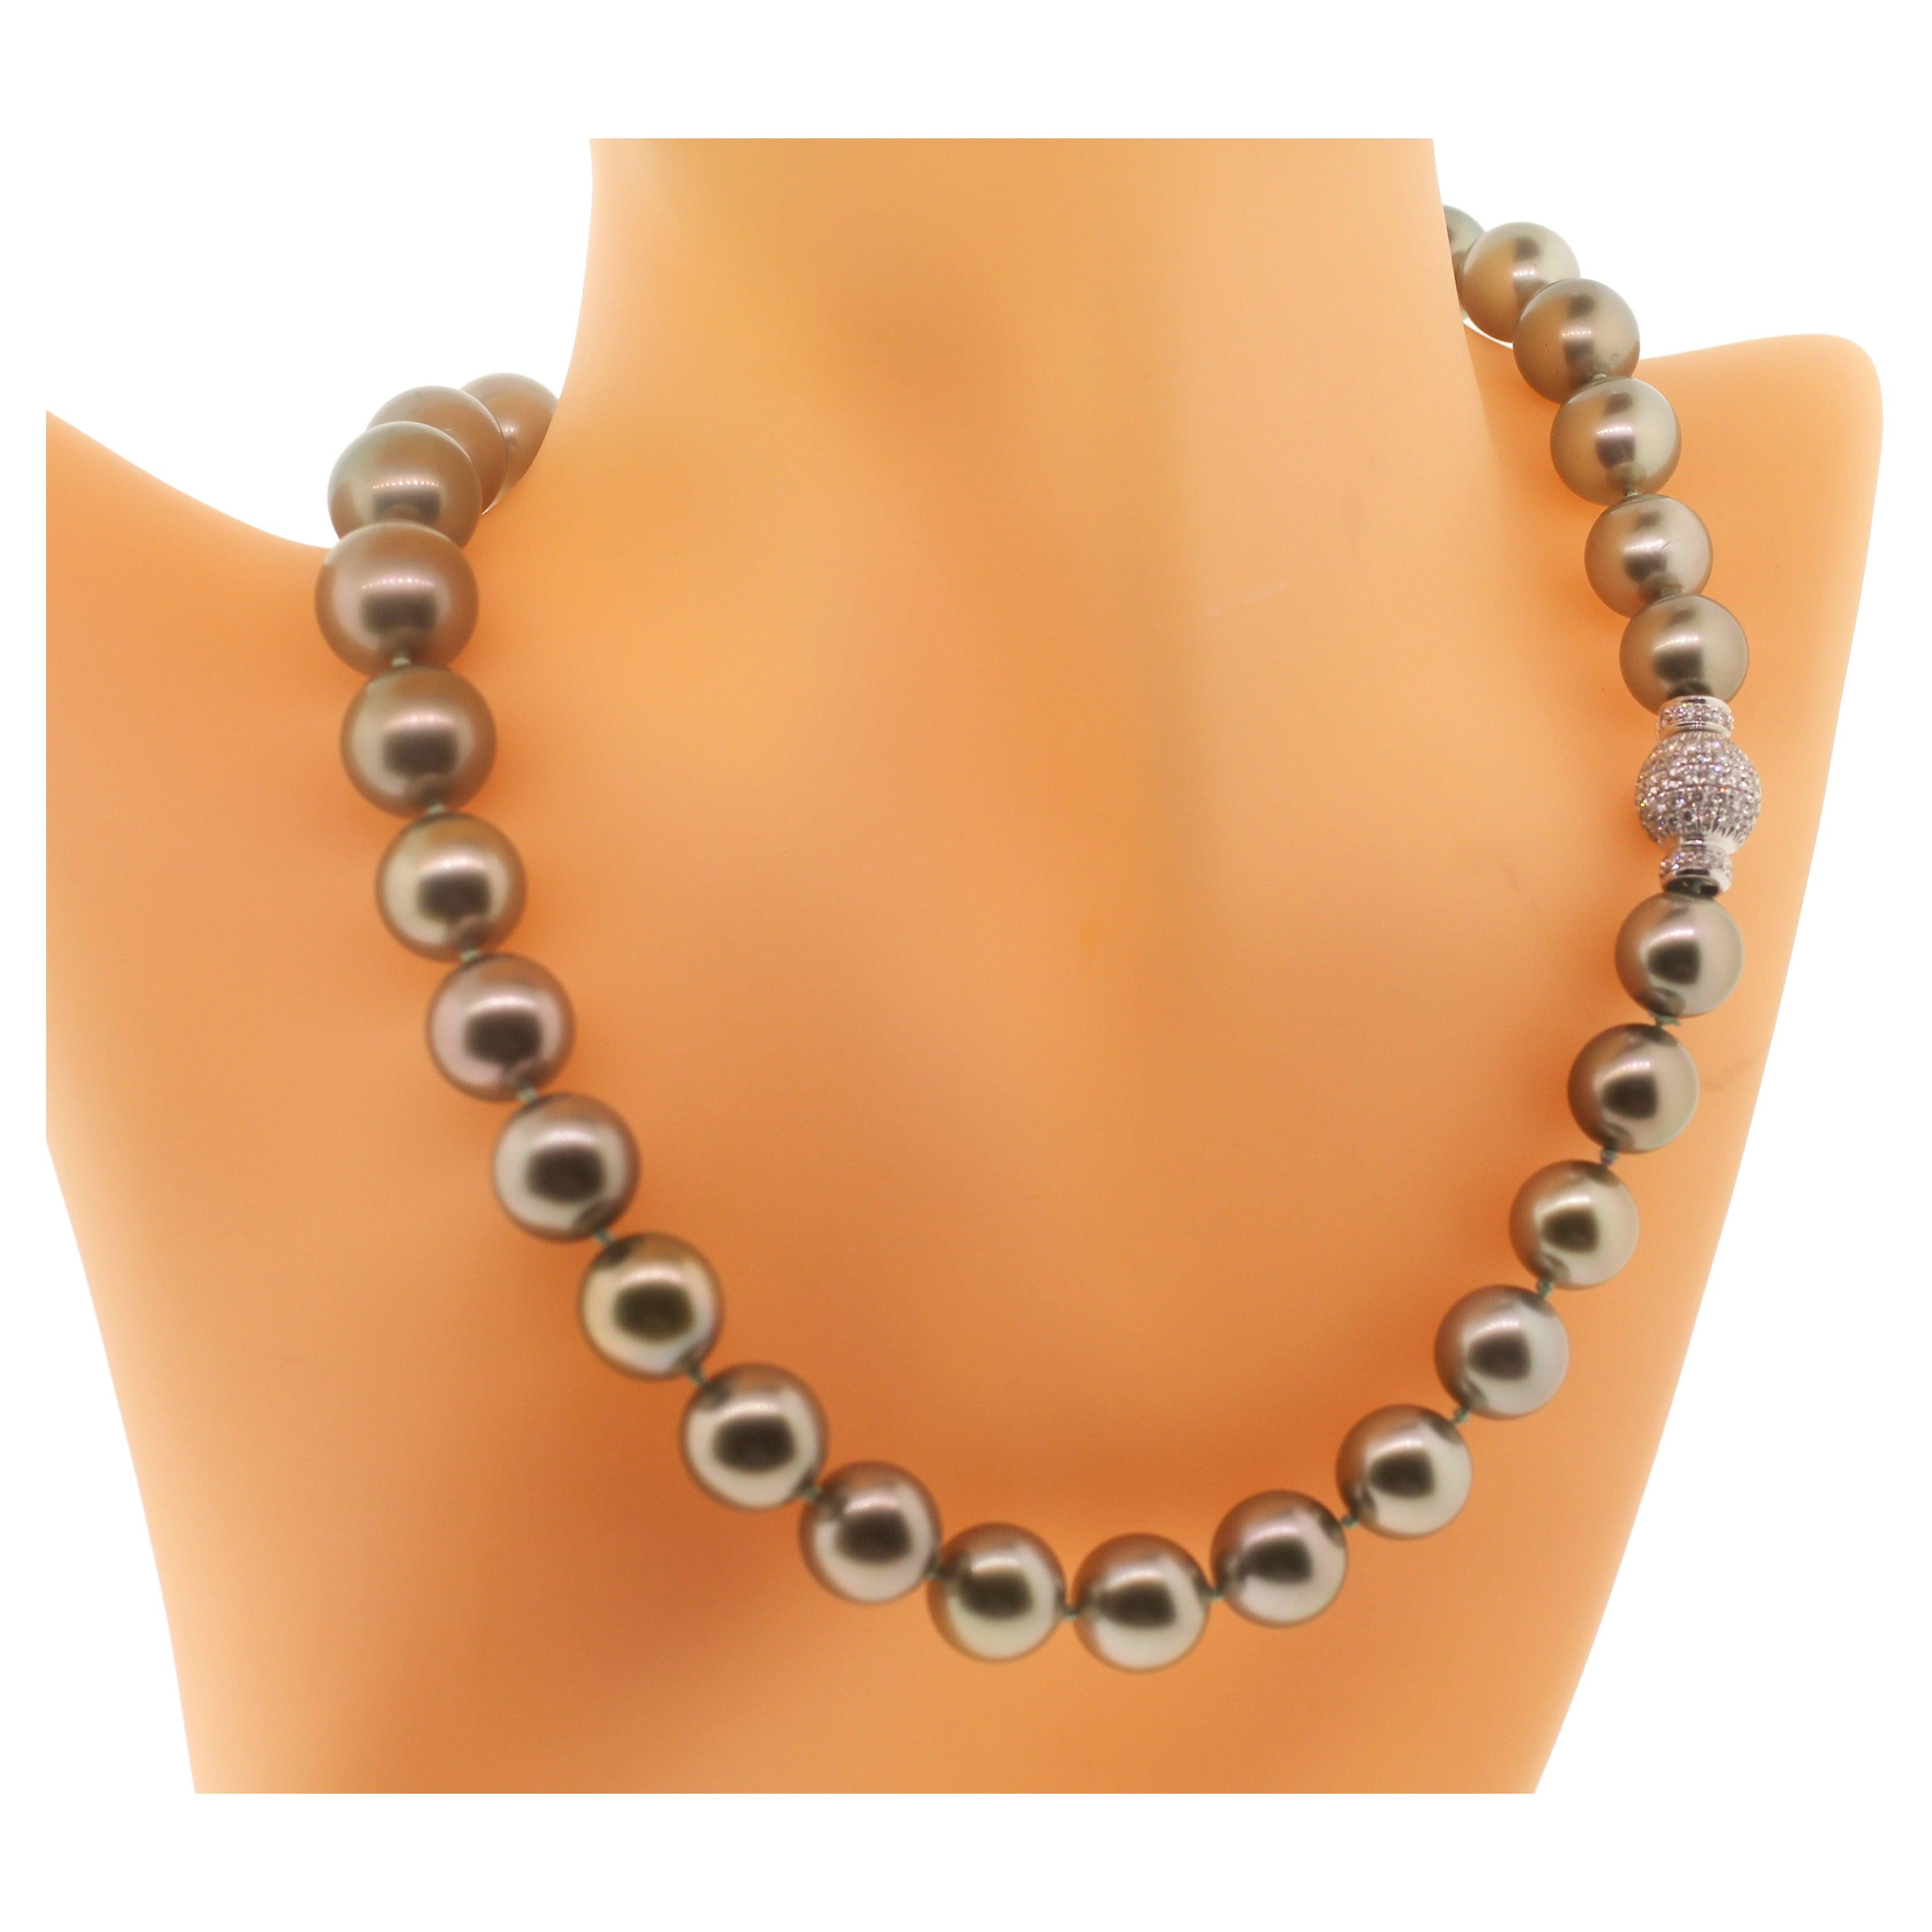 Hakimoto By Jewel Of Ocean 18K South Sea Strand Necklace
18K White Gold  Full Diamonds Clasp
Weight (g): 76
Cultured Tahitian South Sea Pearl 
Pearl Size: 12X10 mm 
Pearl Shape: Round 
Body color: Pistachio
Orient: Very Good
Luster: Very